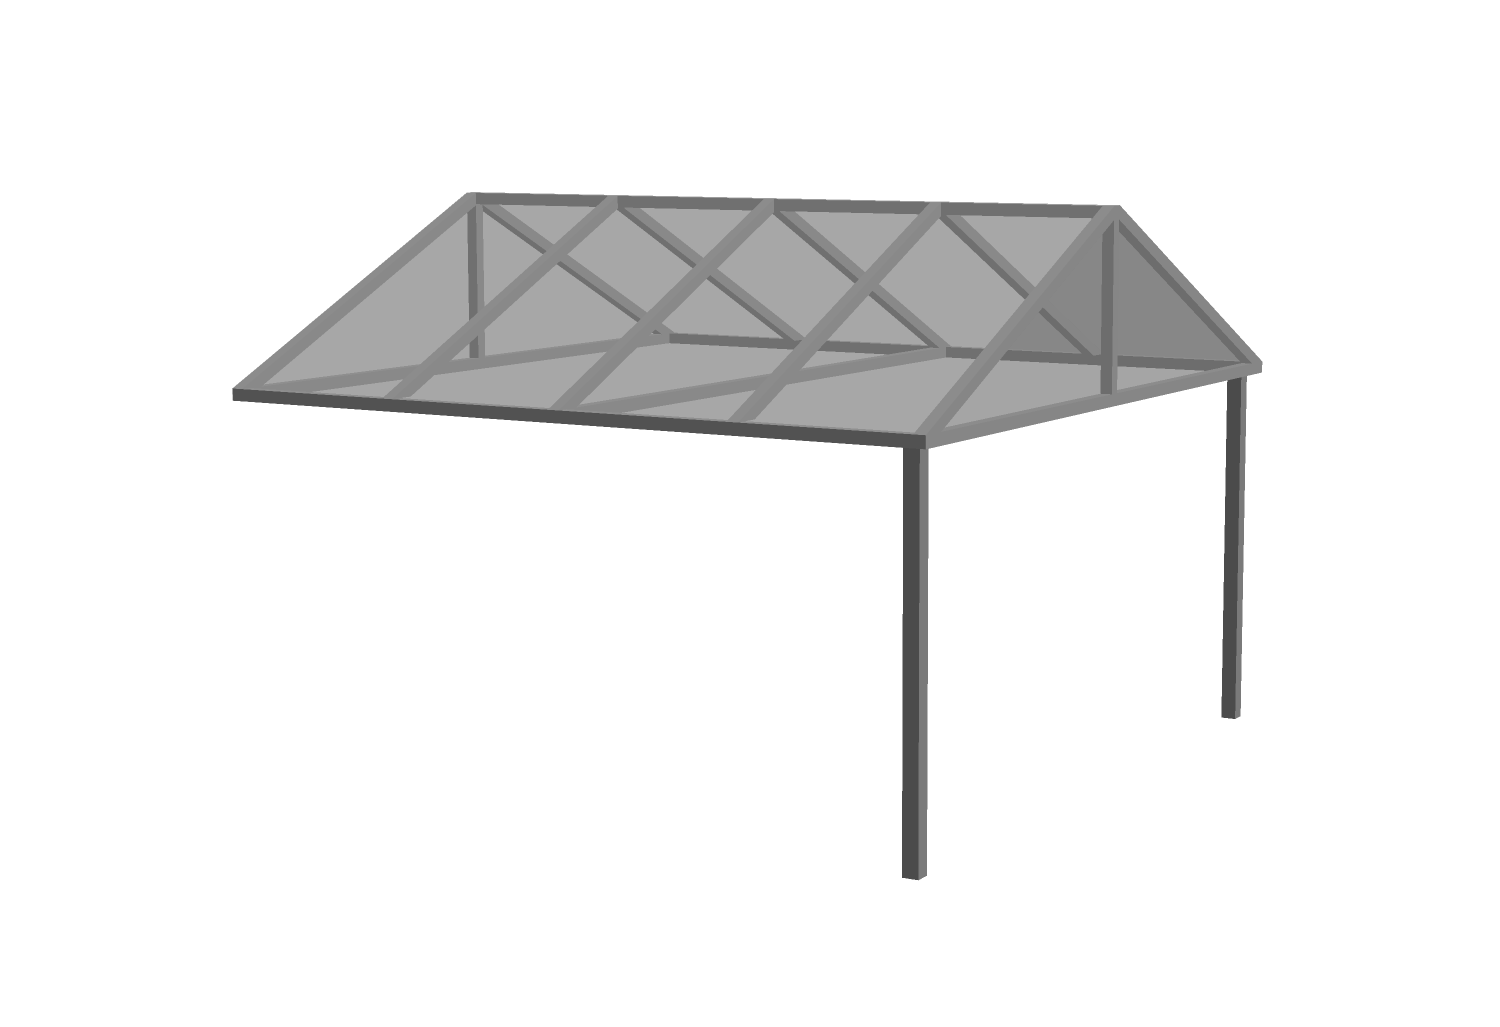 3D model of a gable marquee awning